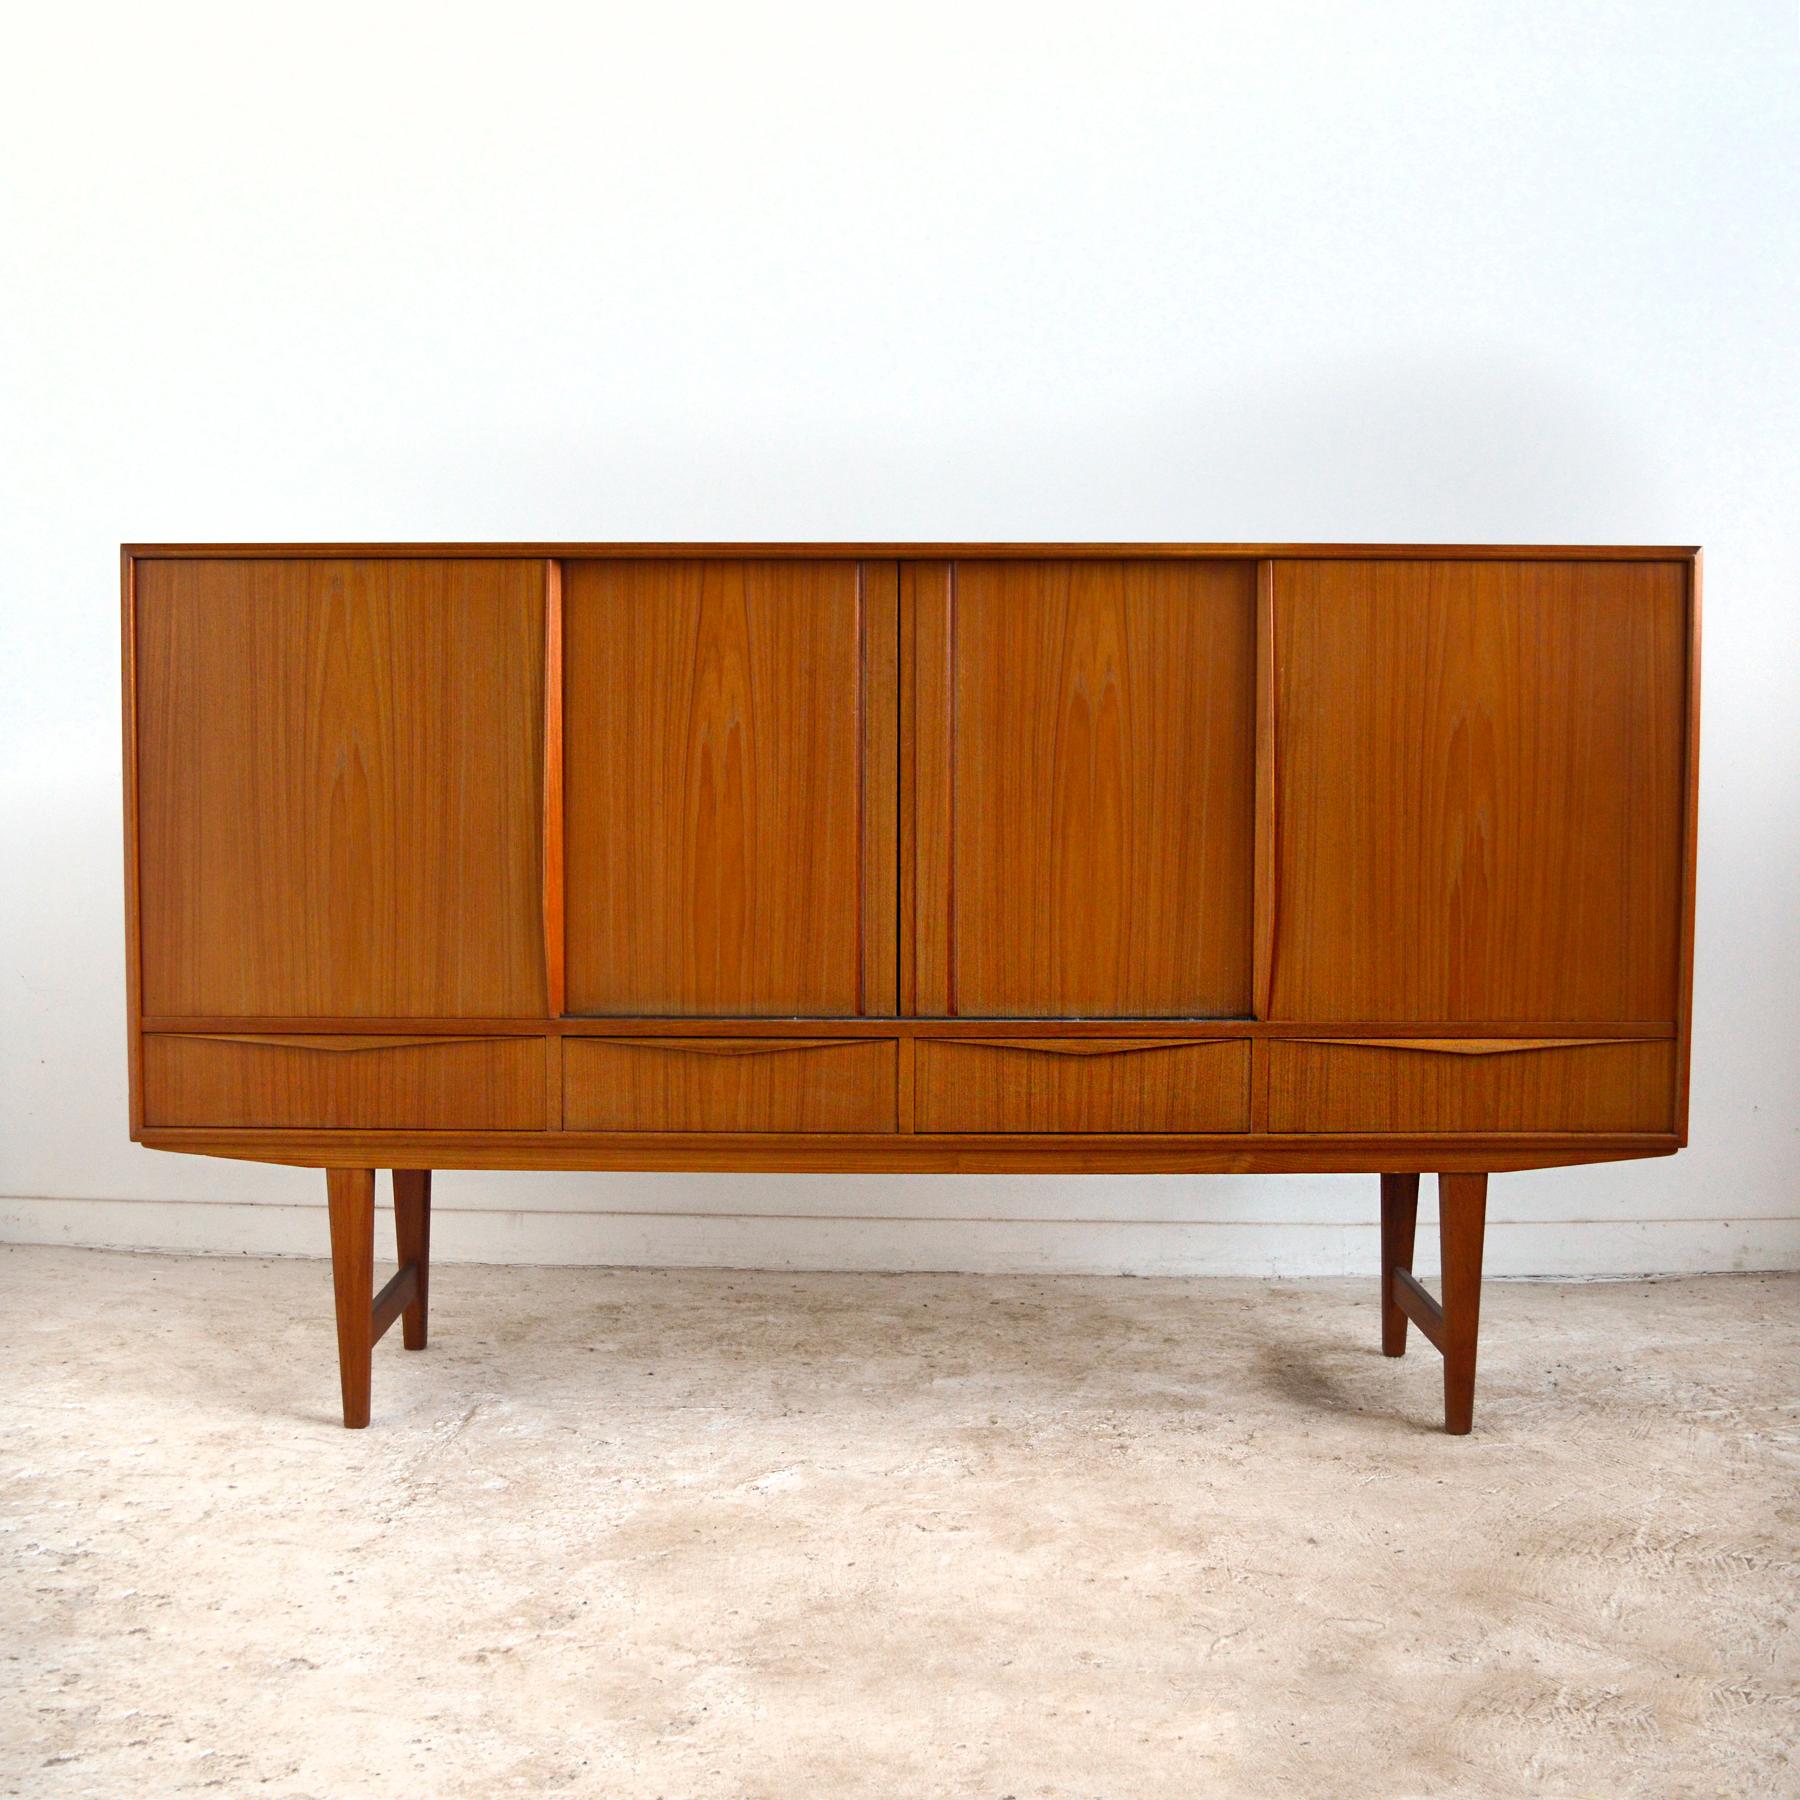 This stately E. W. Bach credenza crafted by Sejling Skabe of beautiful teak is loaded with subtle details. The Fine craftsmanship is evident everywhere you look: the sculpted edge and door pulls, the dovetailed drawers and mirror-lined cabinet. Four